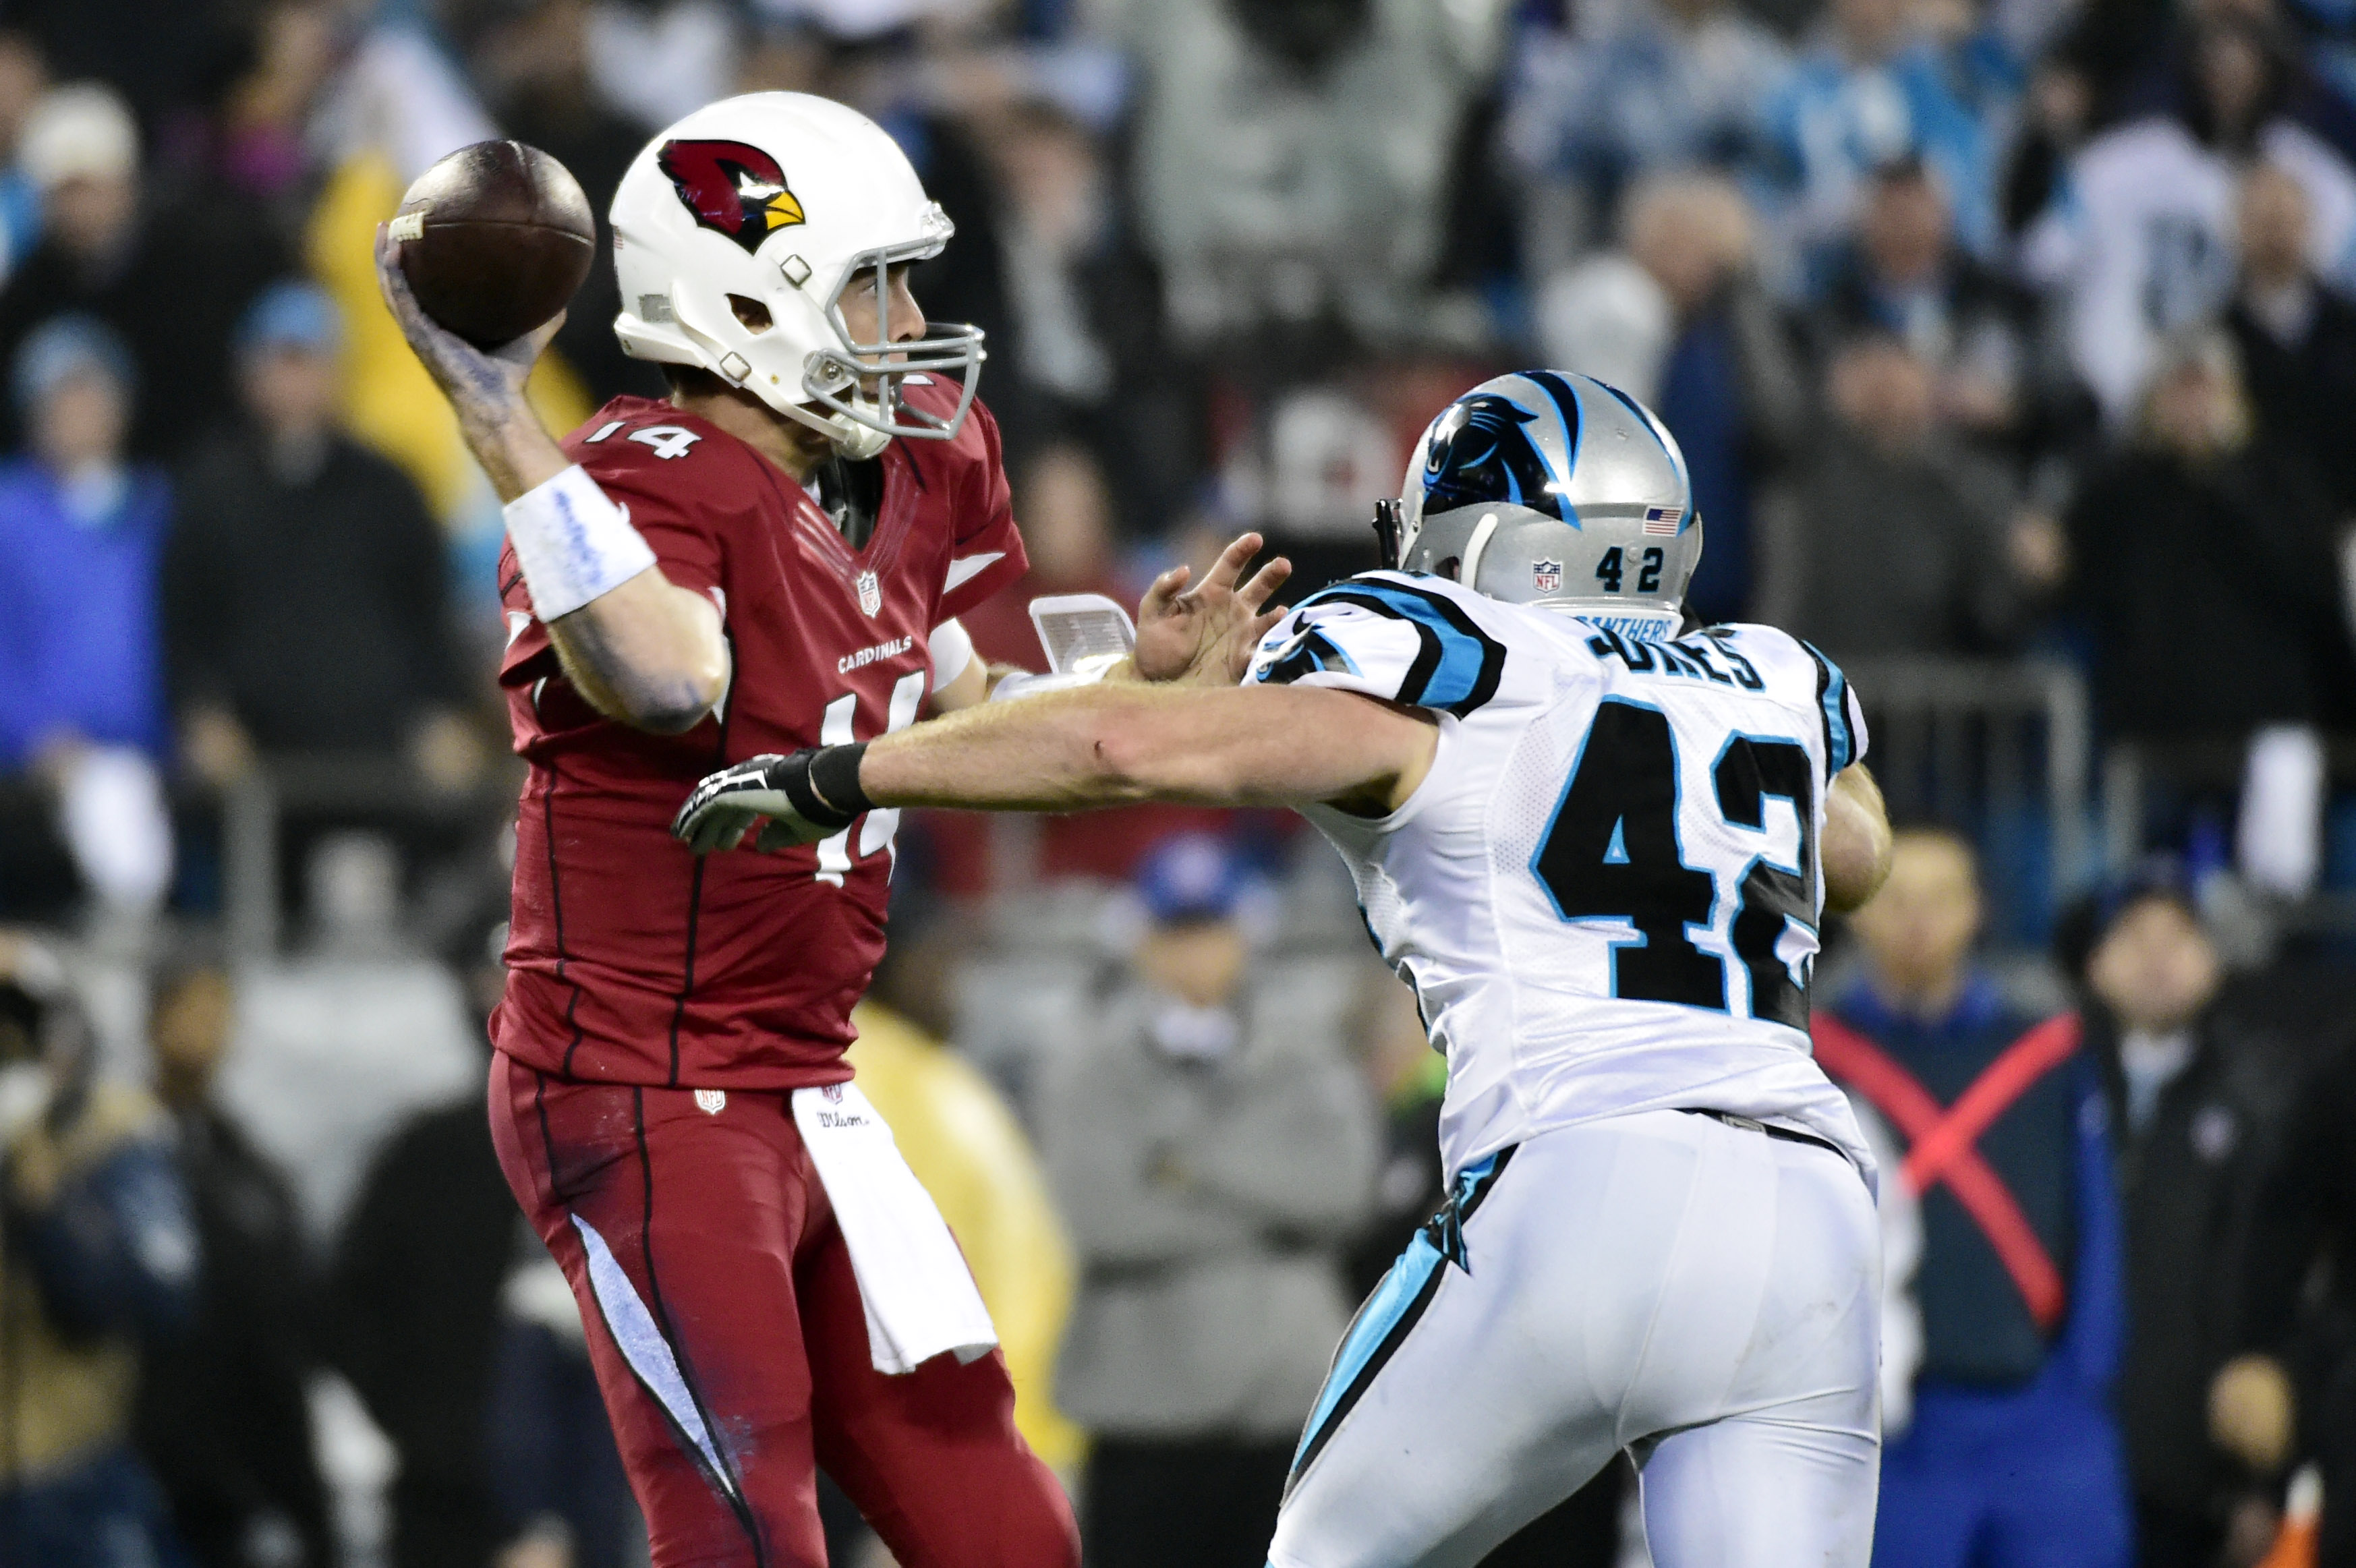 Ryan Lindley was pressured throughout, sacked four times with two INTs. (USA TODAY Sports)